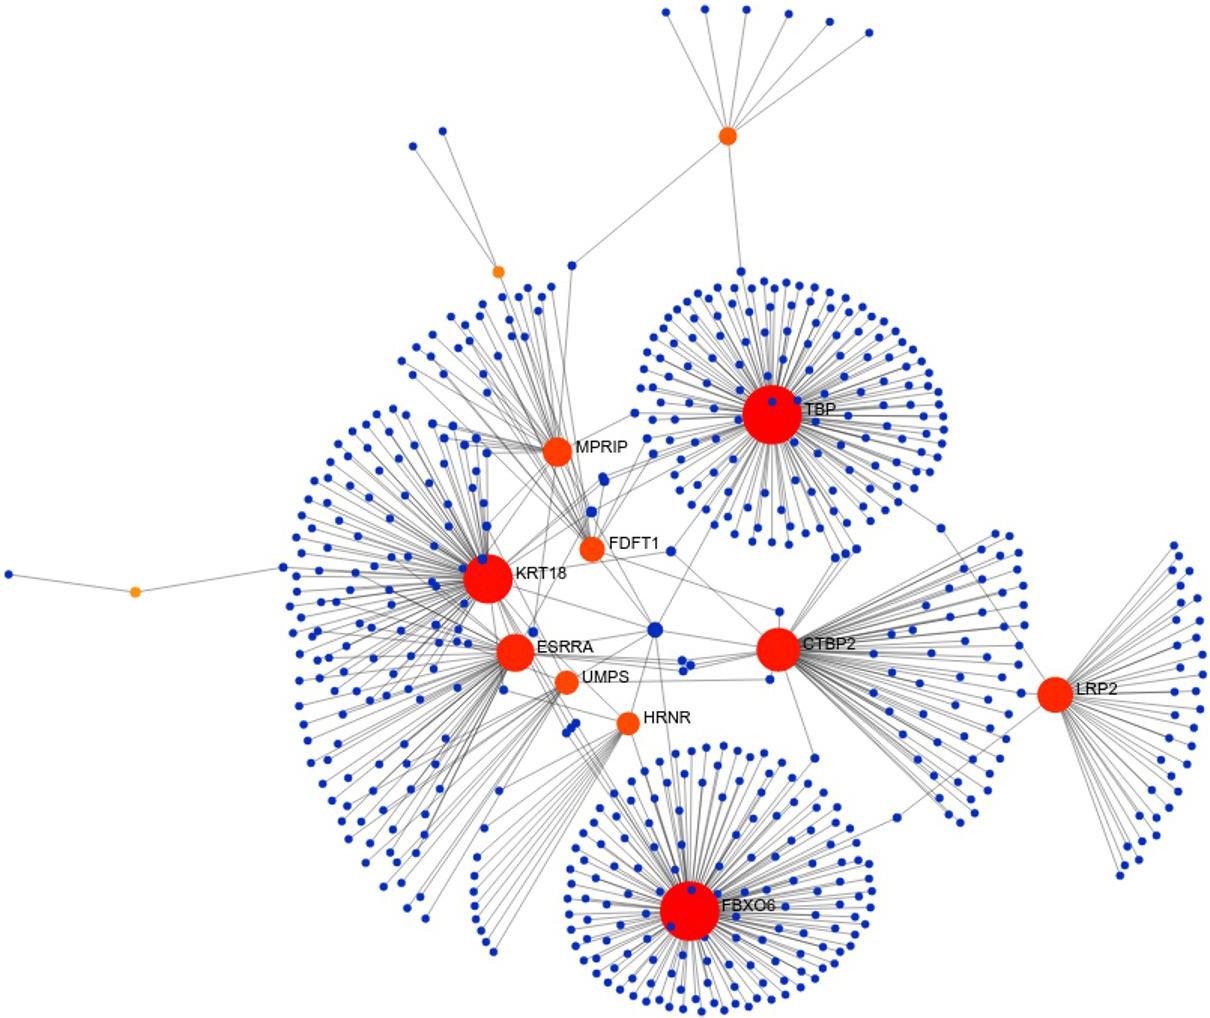 Hub genes in significant network modules. The hub genes with high degree and high betweenness were denoted with red colour.